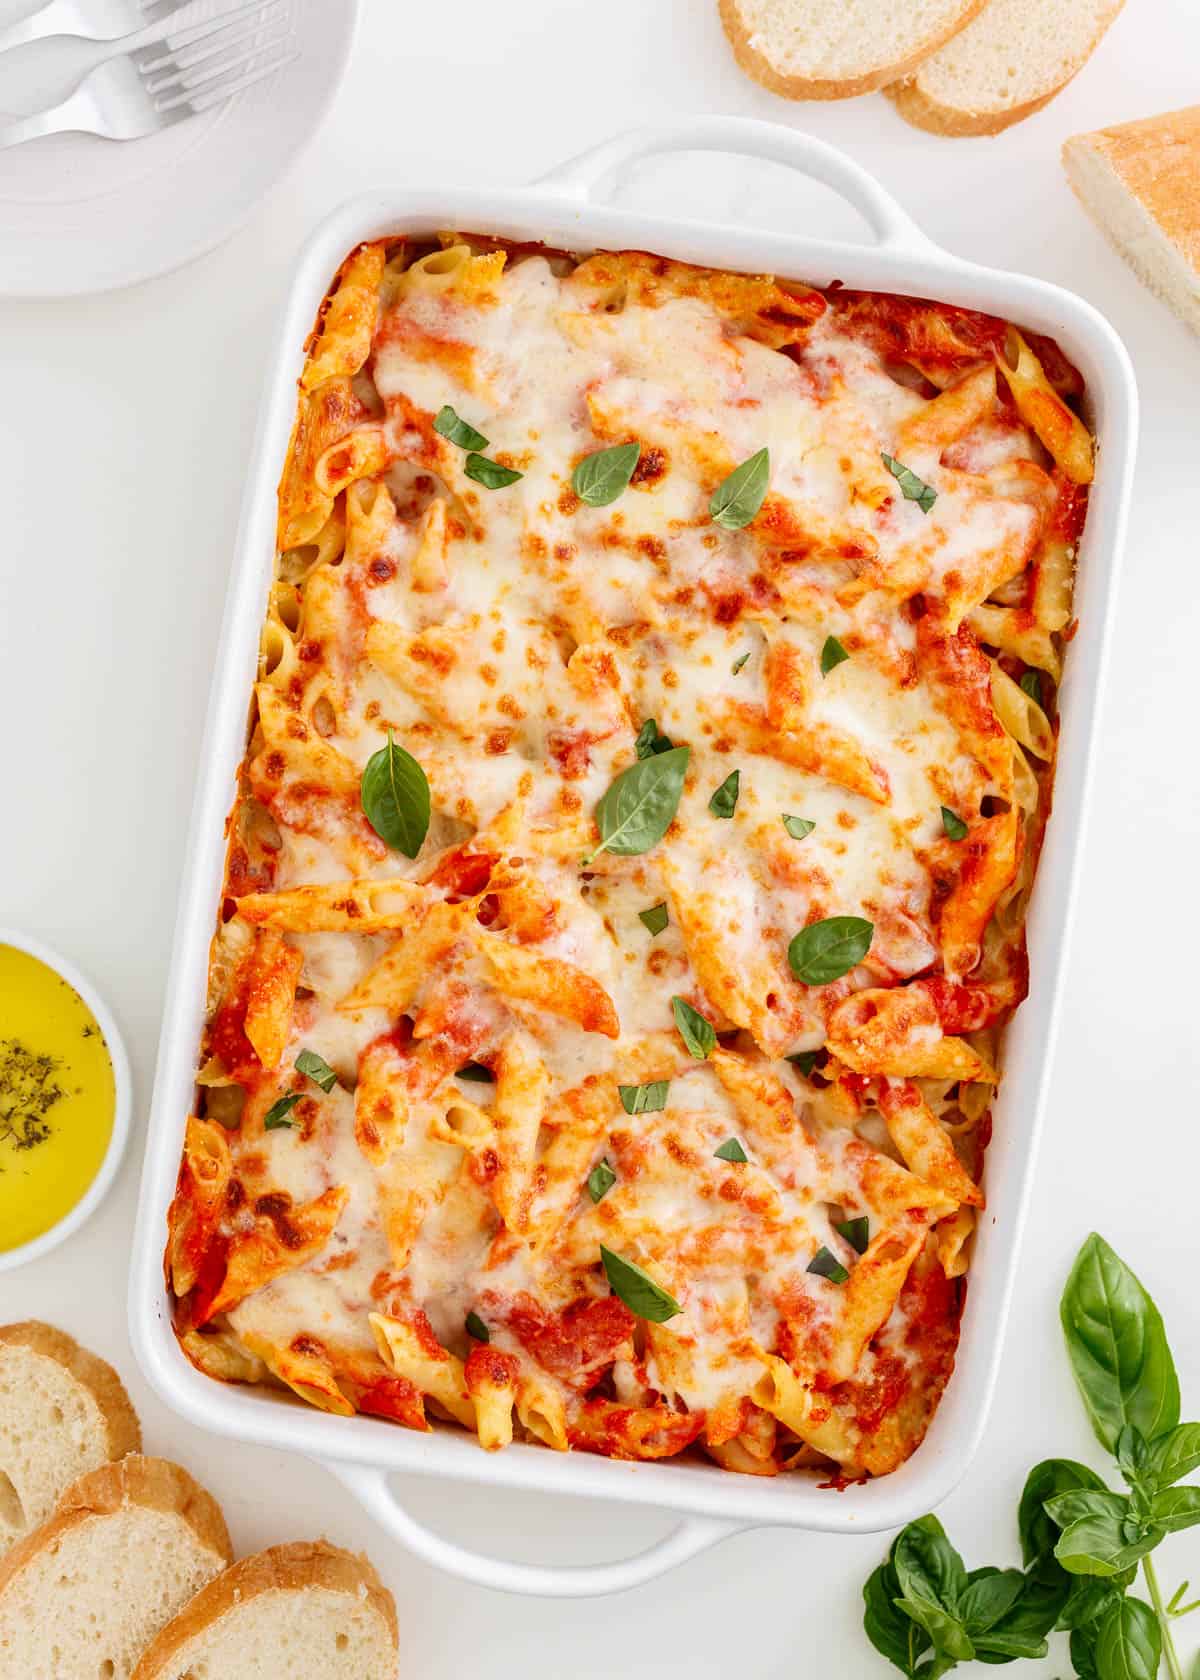 Mostaccioli baked in a white dish.